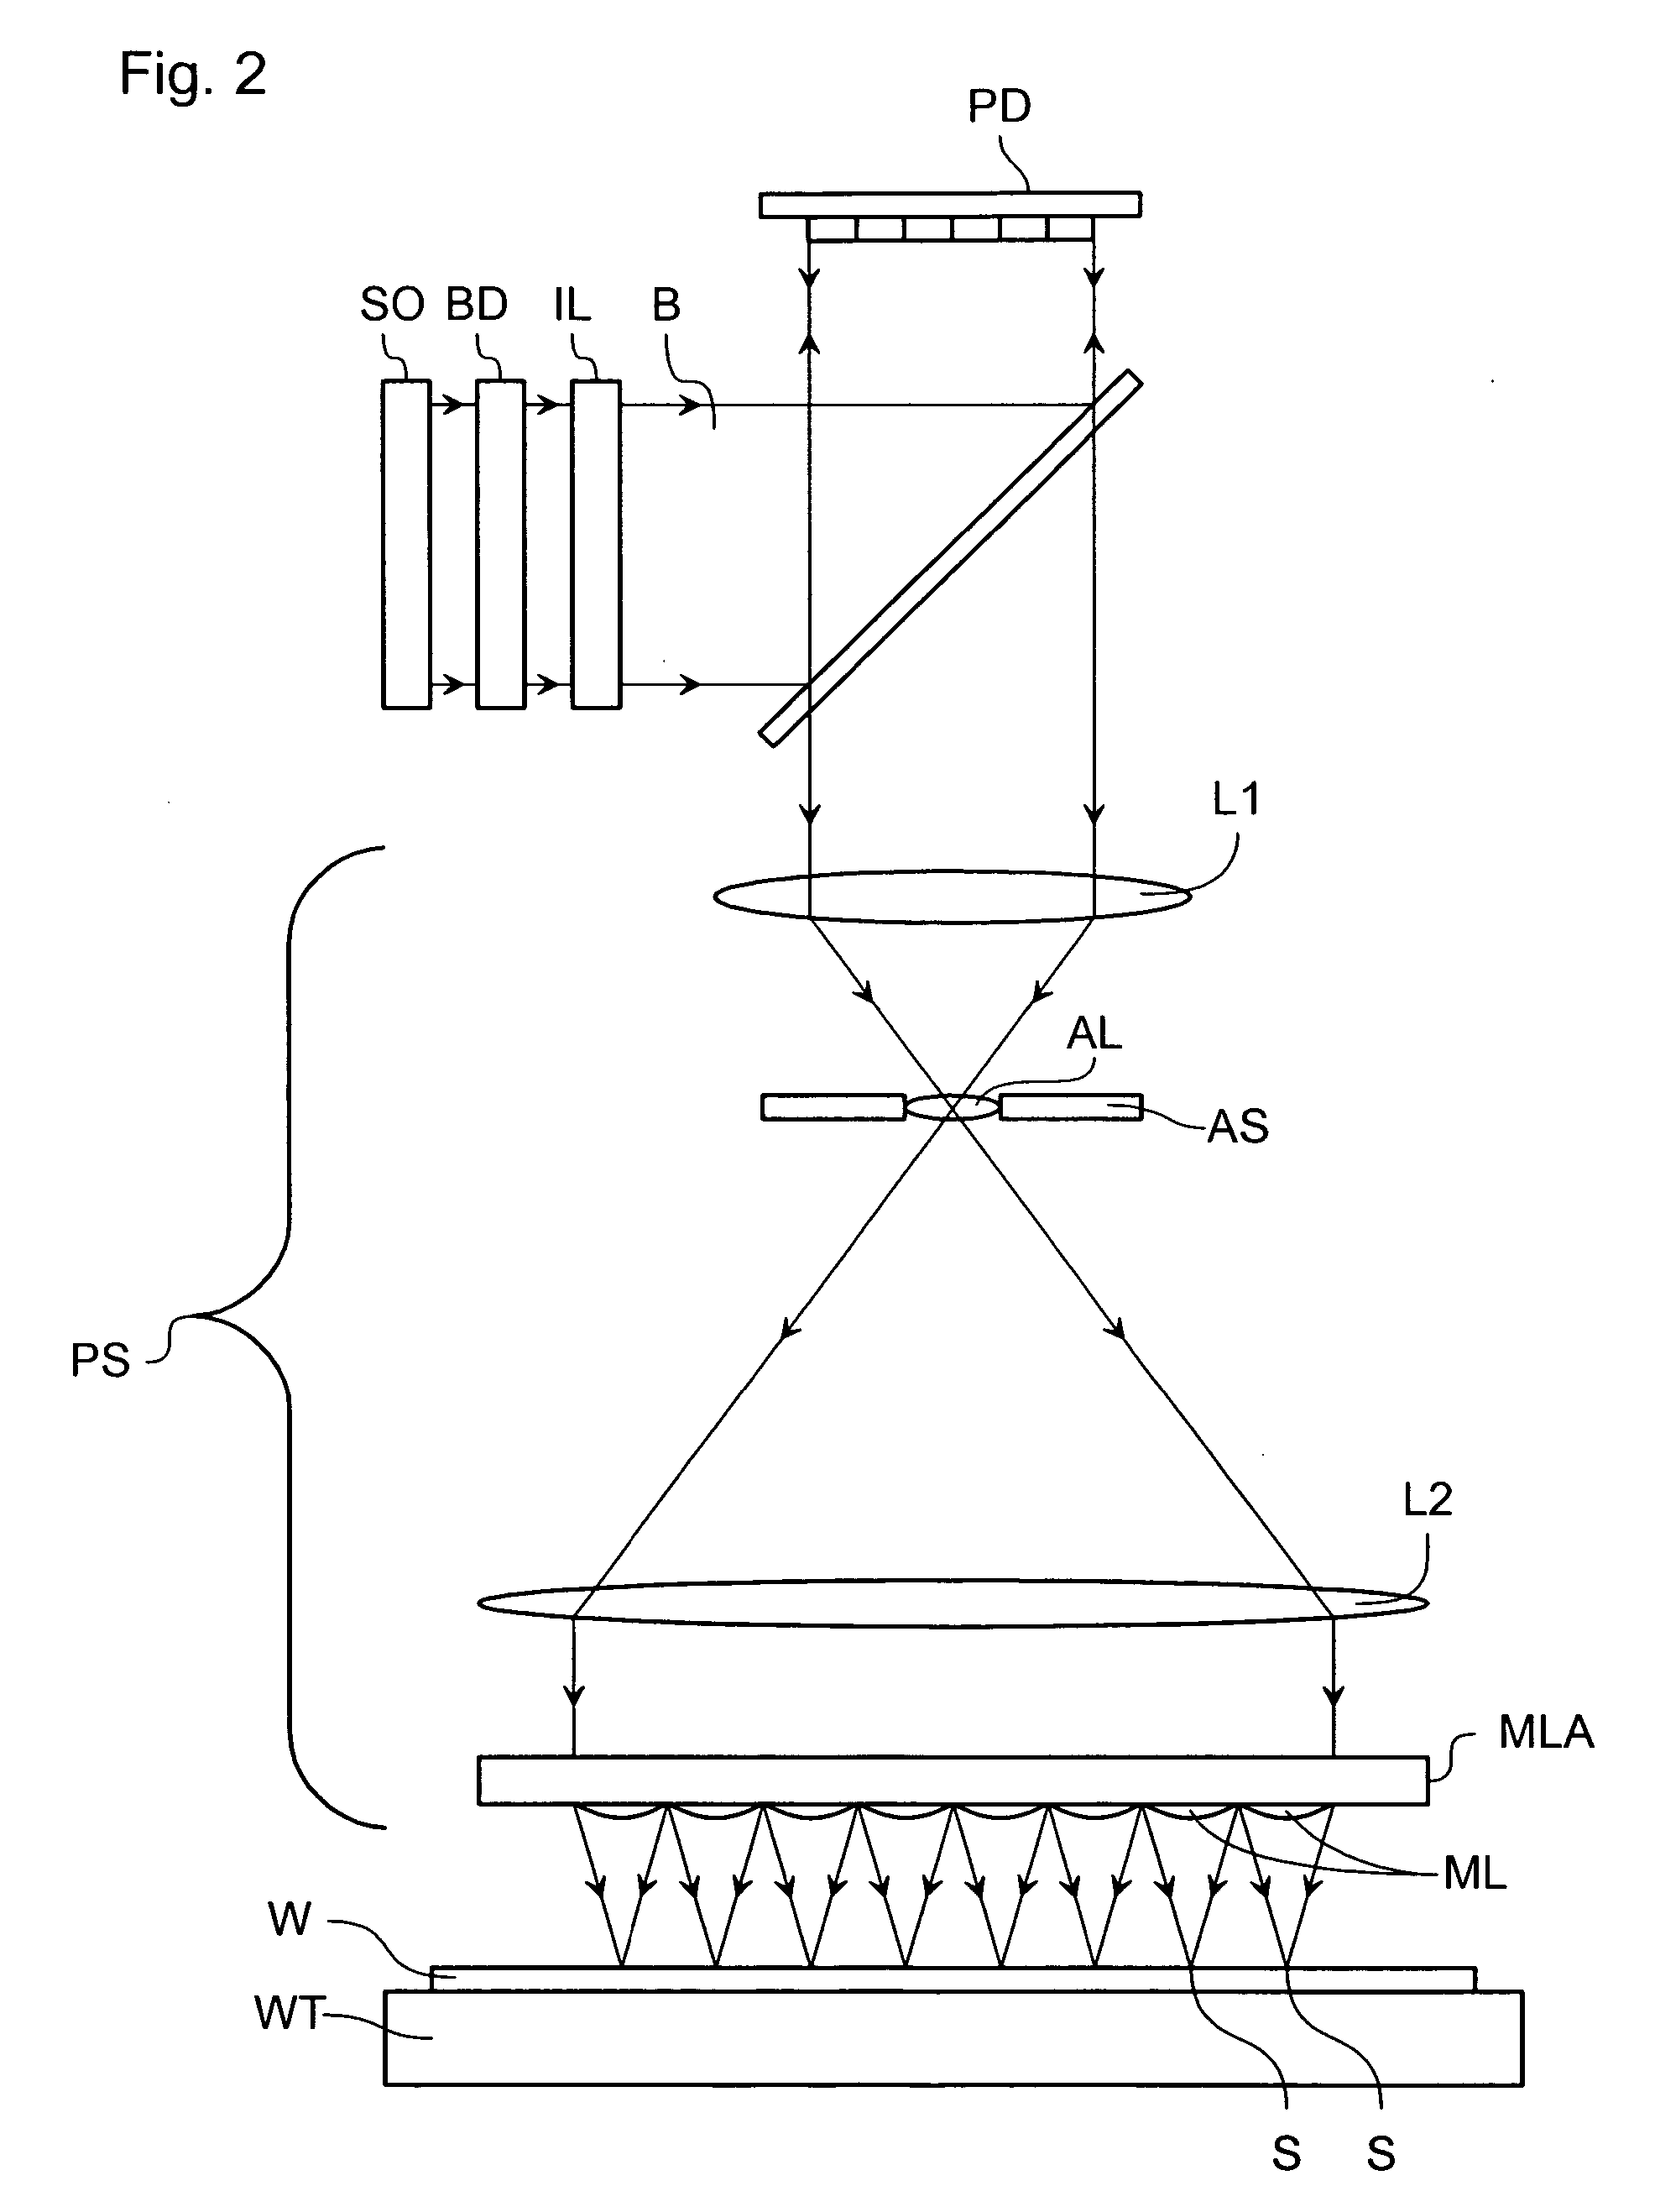 Lithographic apparatus and device manufacturing method utilizing a MEMS mirror with large deflection using a non-linear spring arrangement